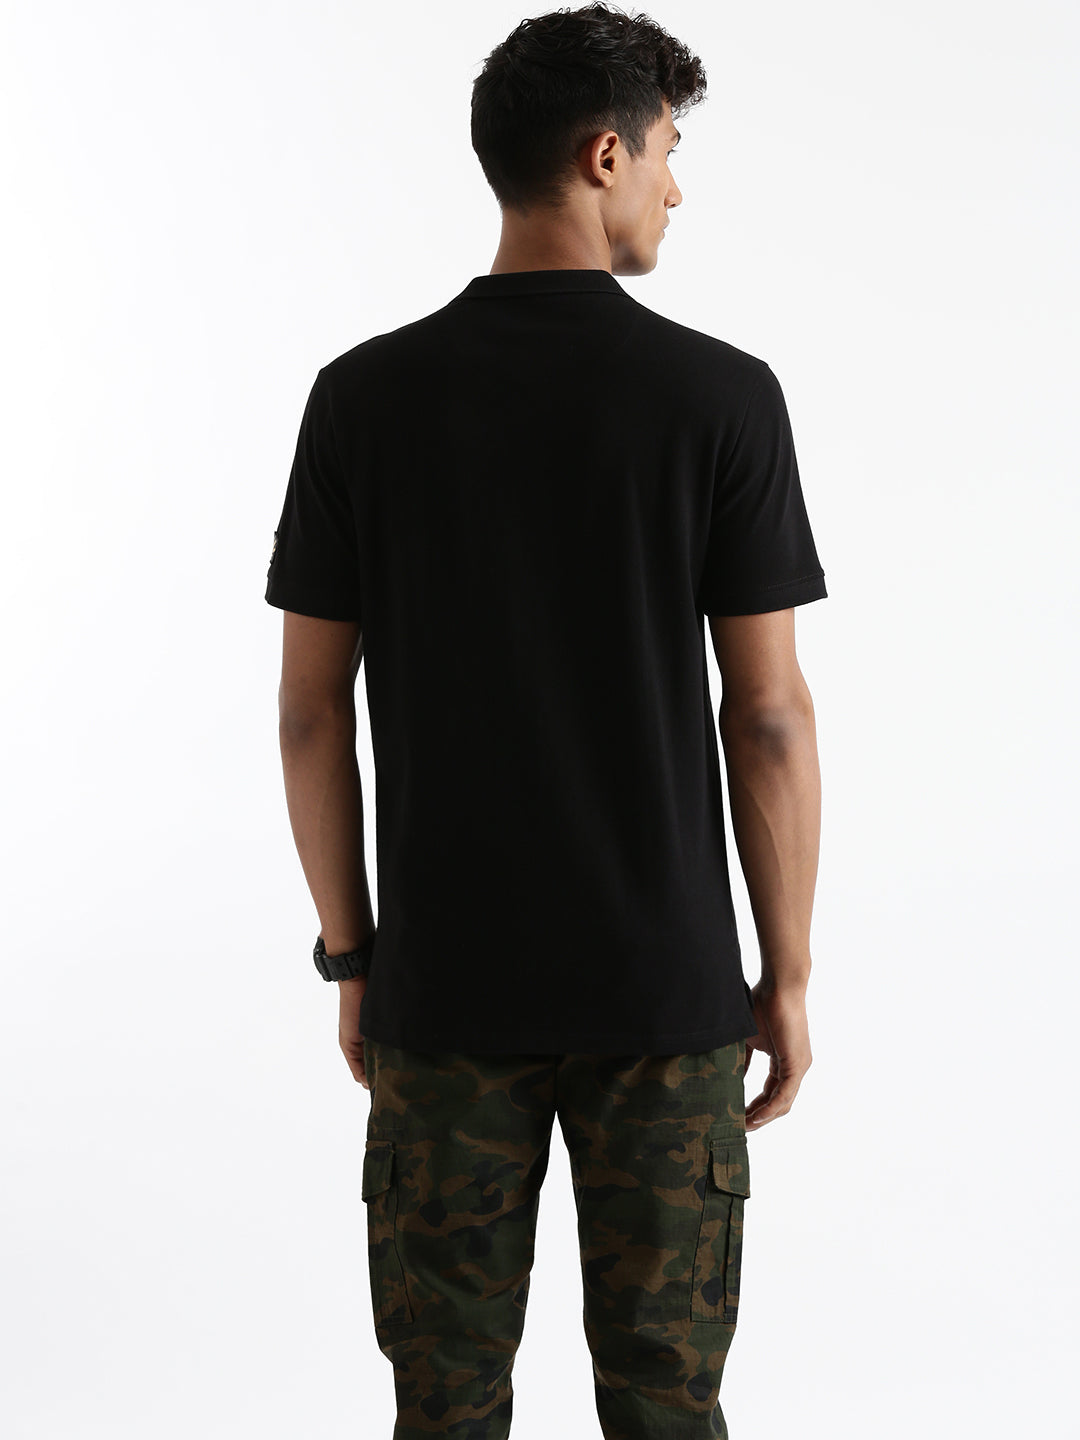 Indian Infantry By A47 Black Polo T-Shirt